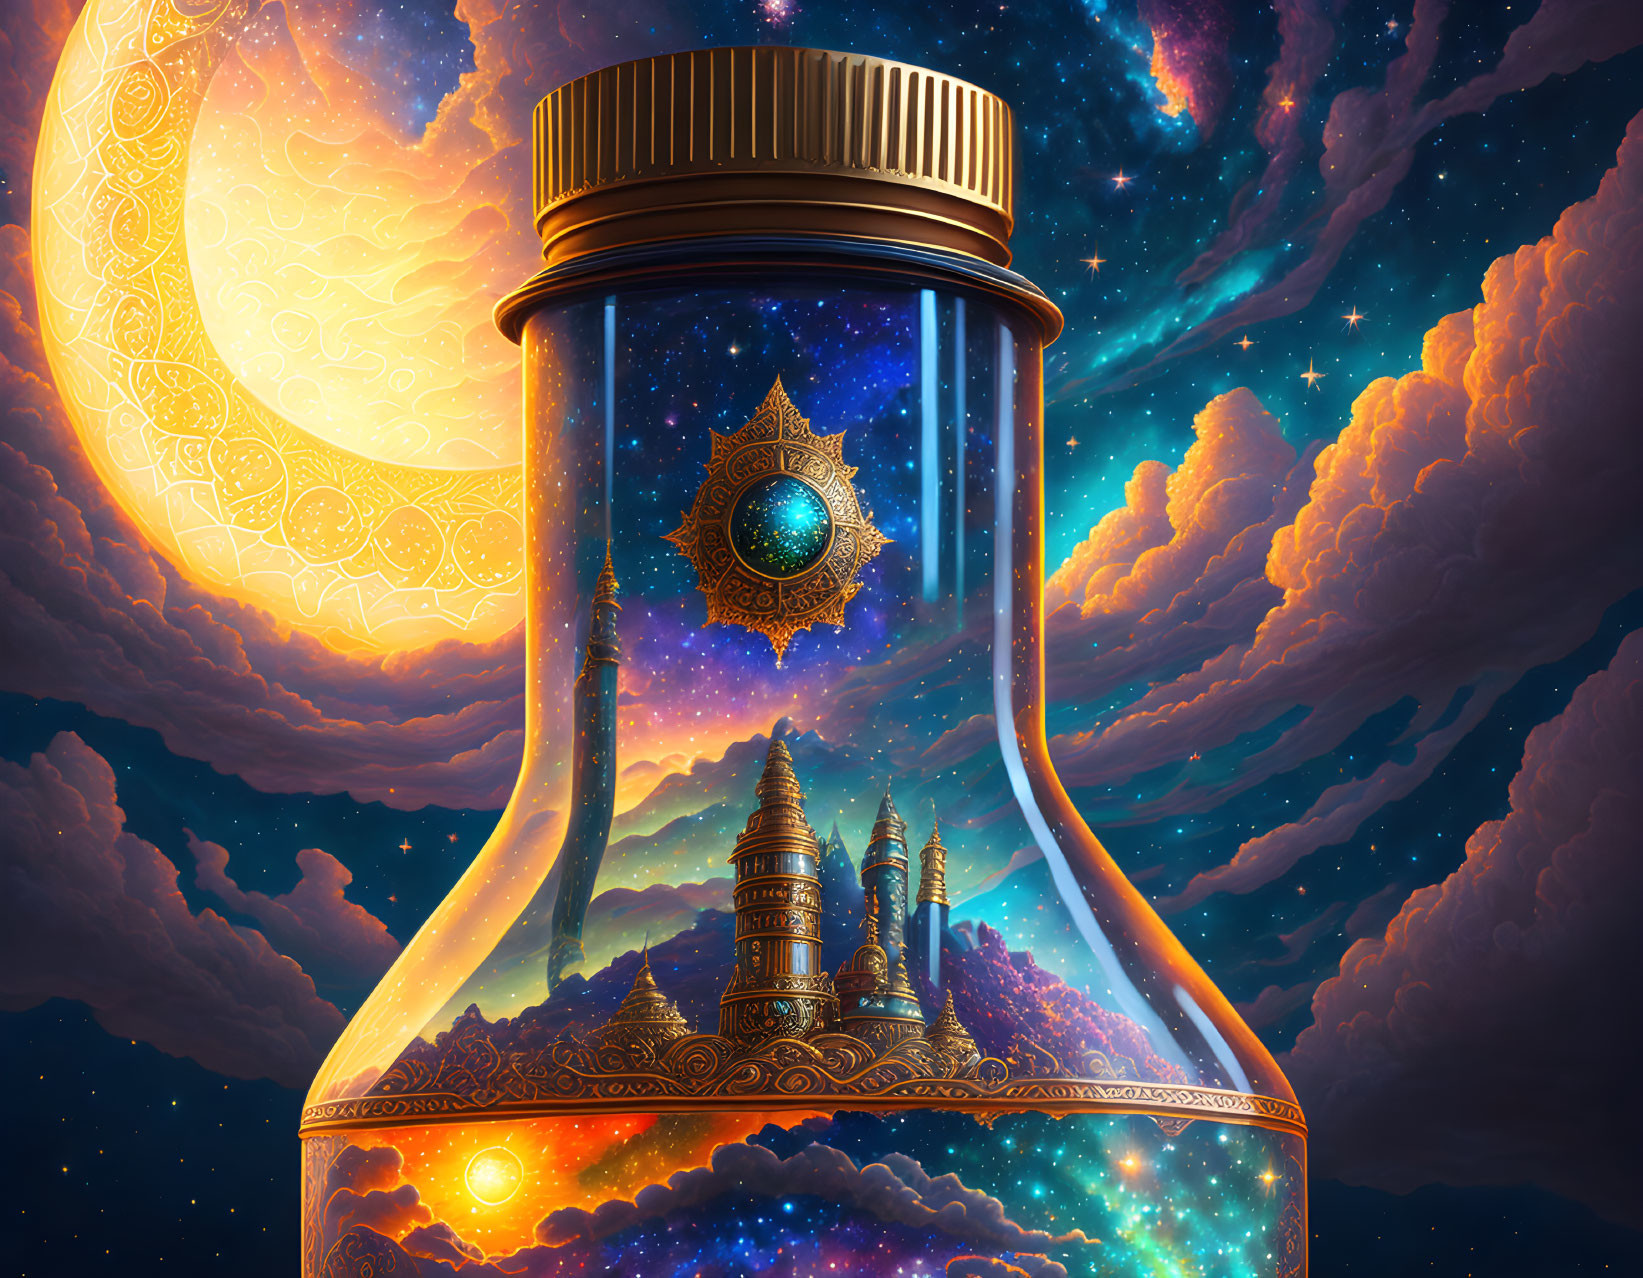 Transparent Bottle with Cosmic Scene: Stars, Planets, Clouds, and Mystical Castle under Cele